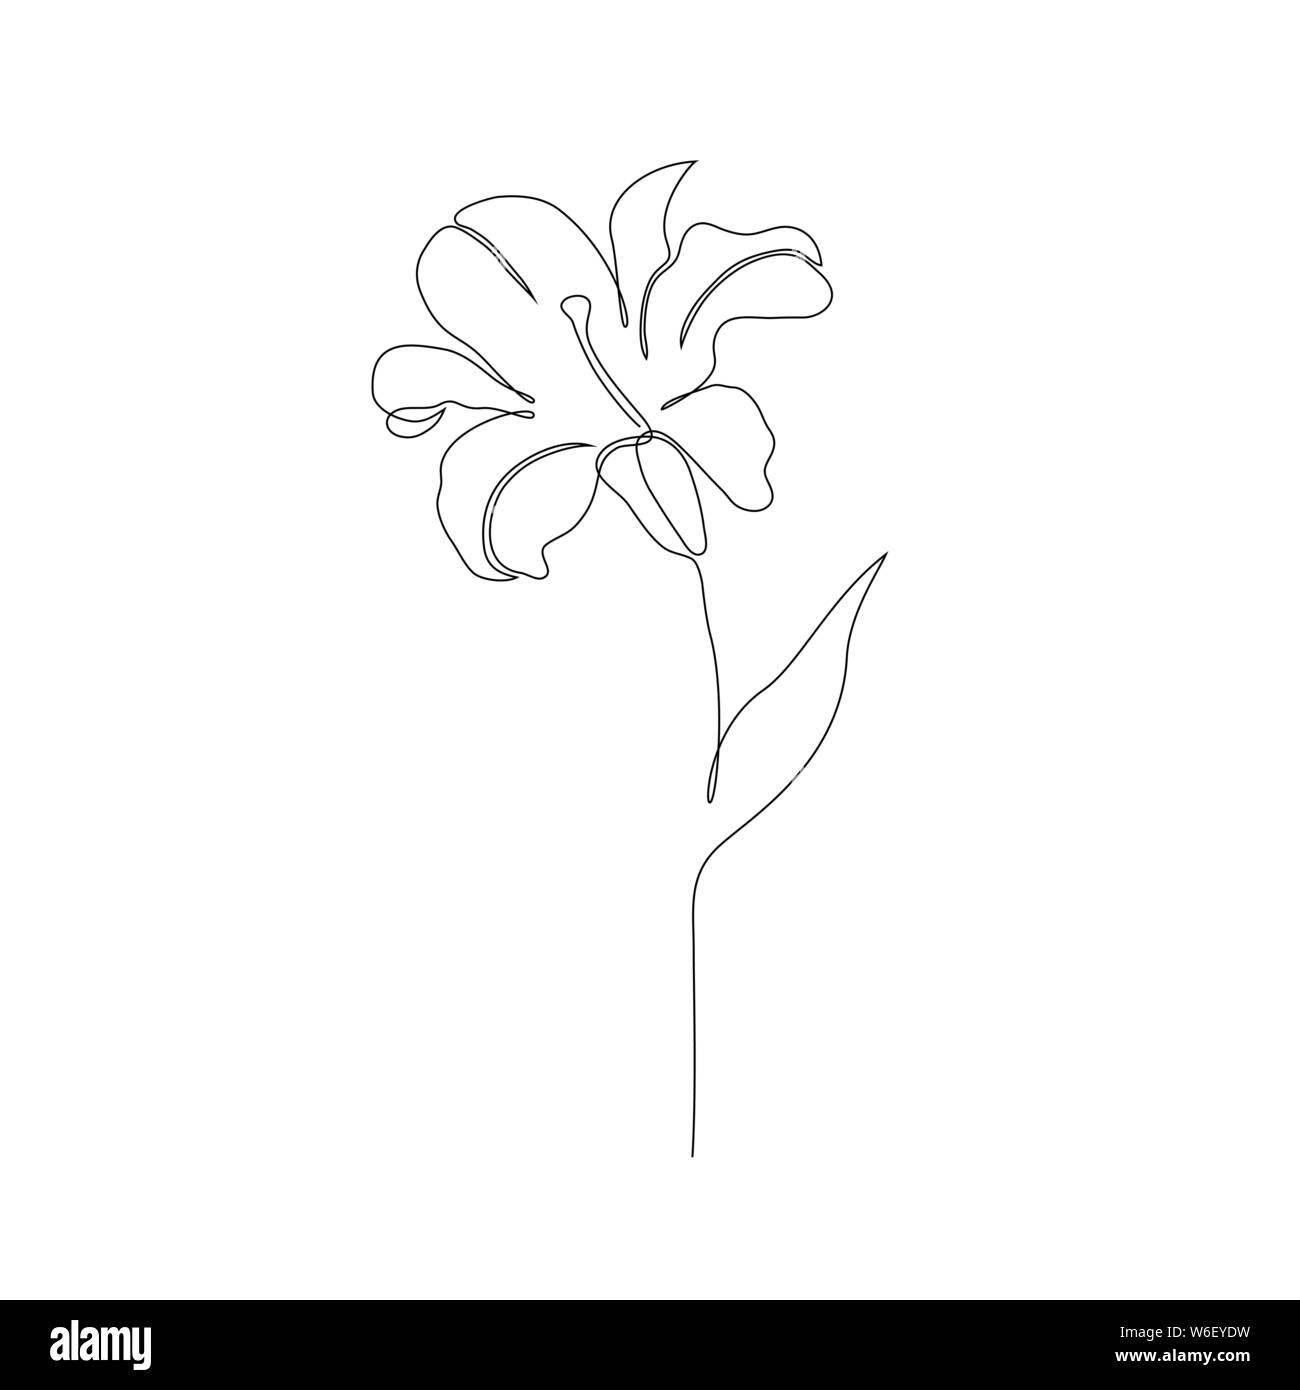 Line drawing of a lily